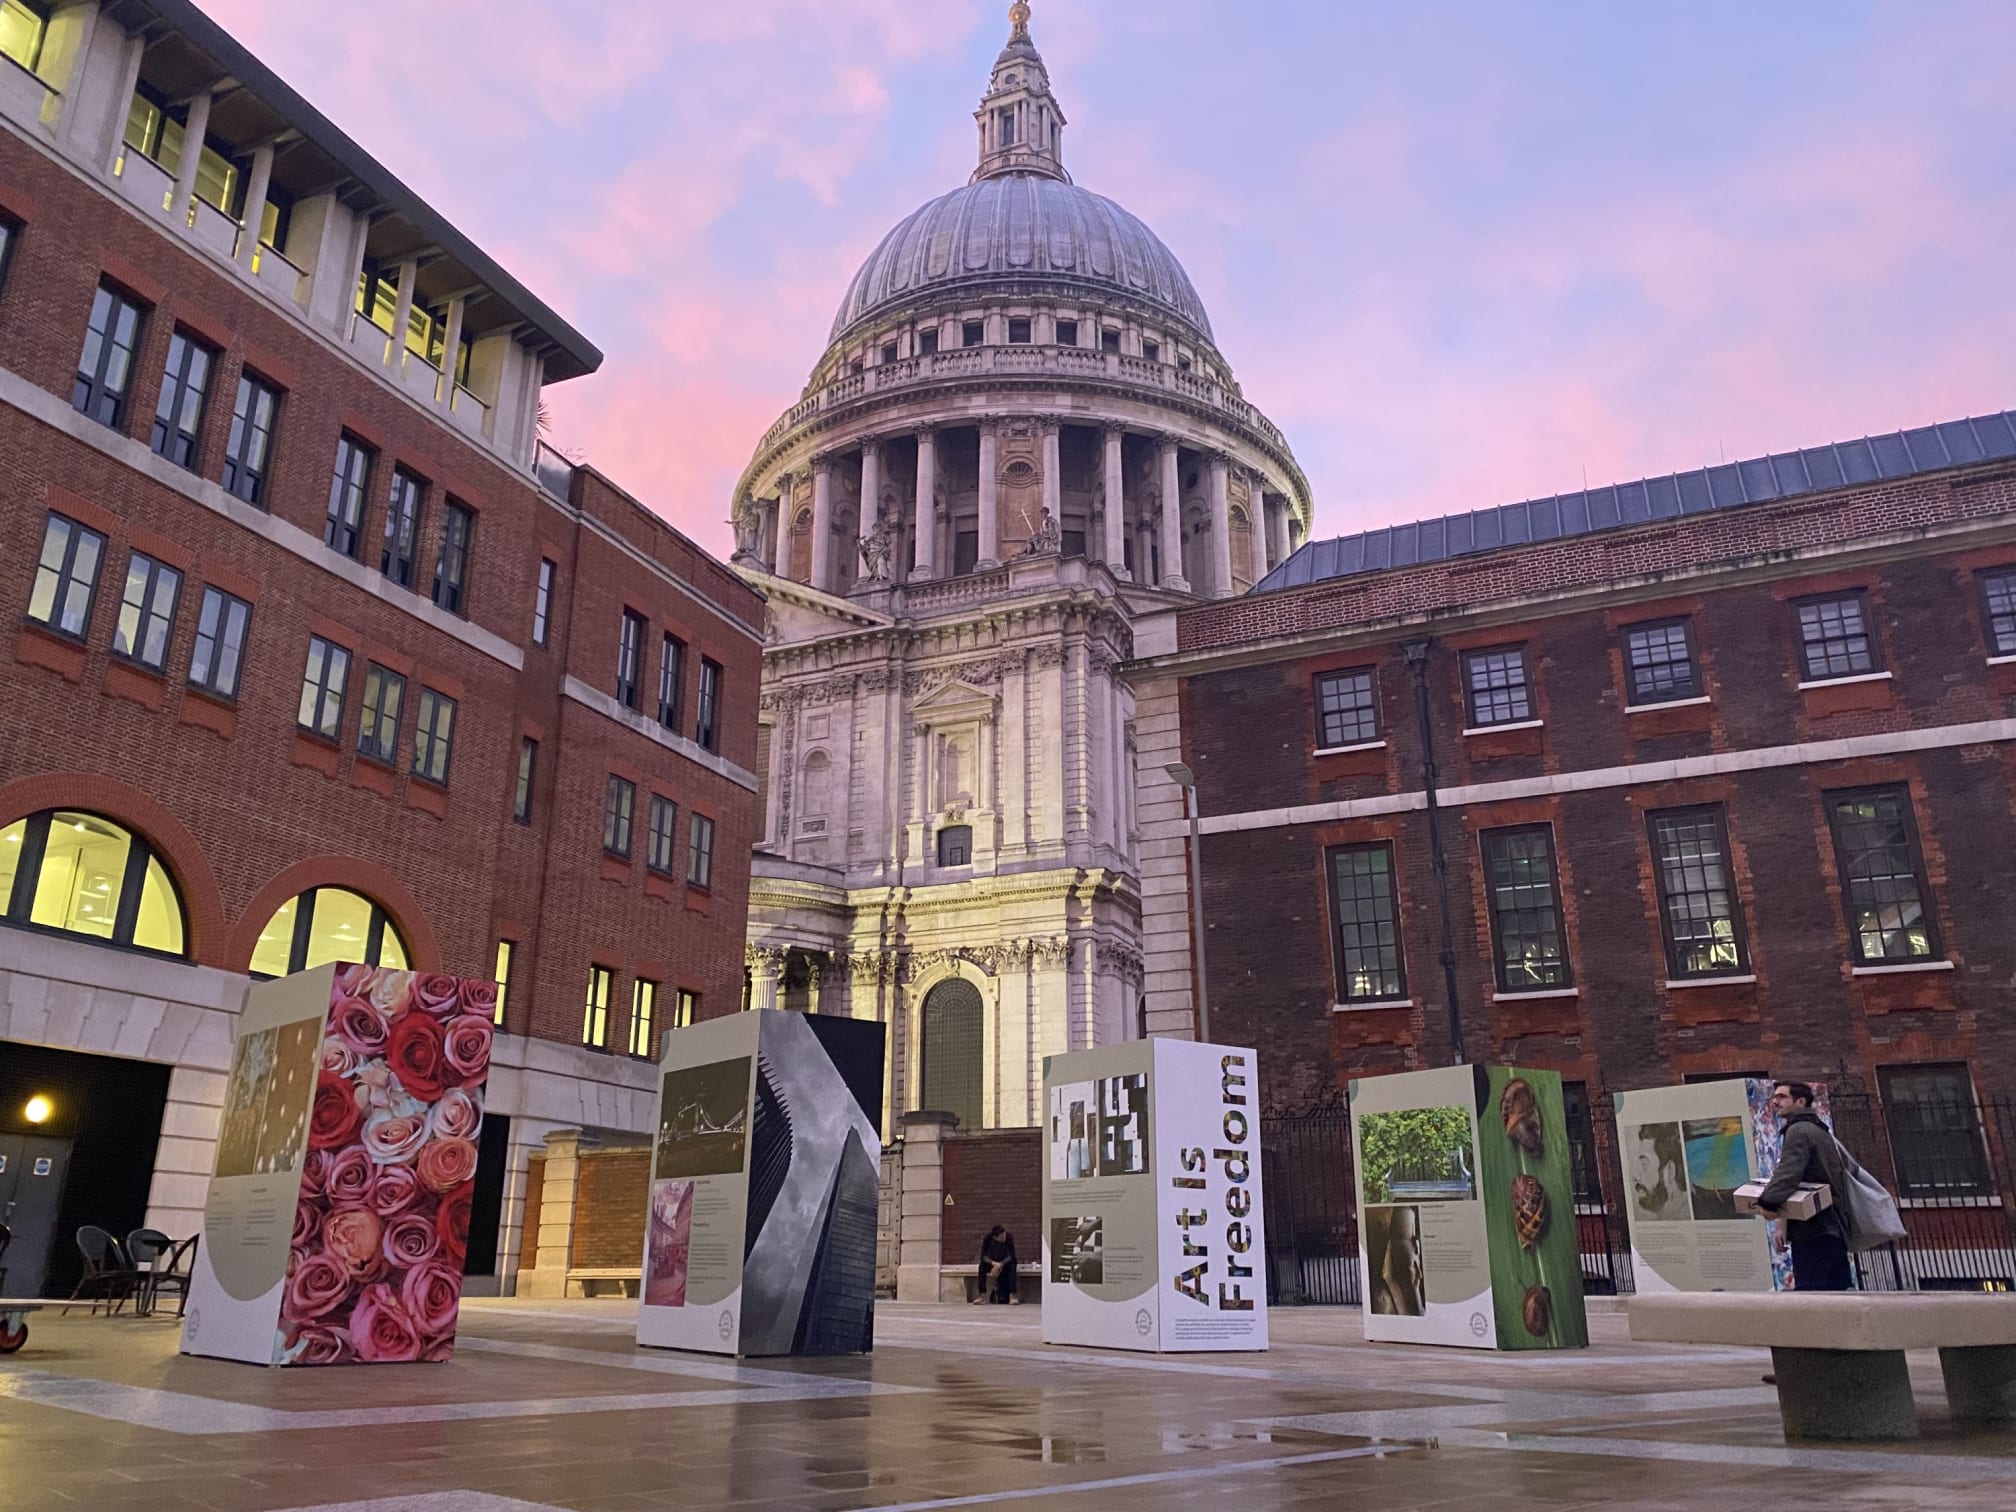 Art Is Freedom exhibition at Paternoster Square